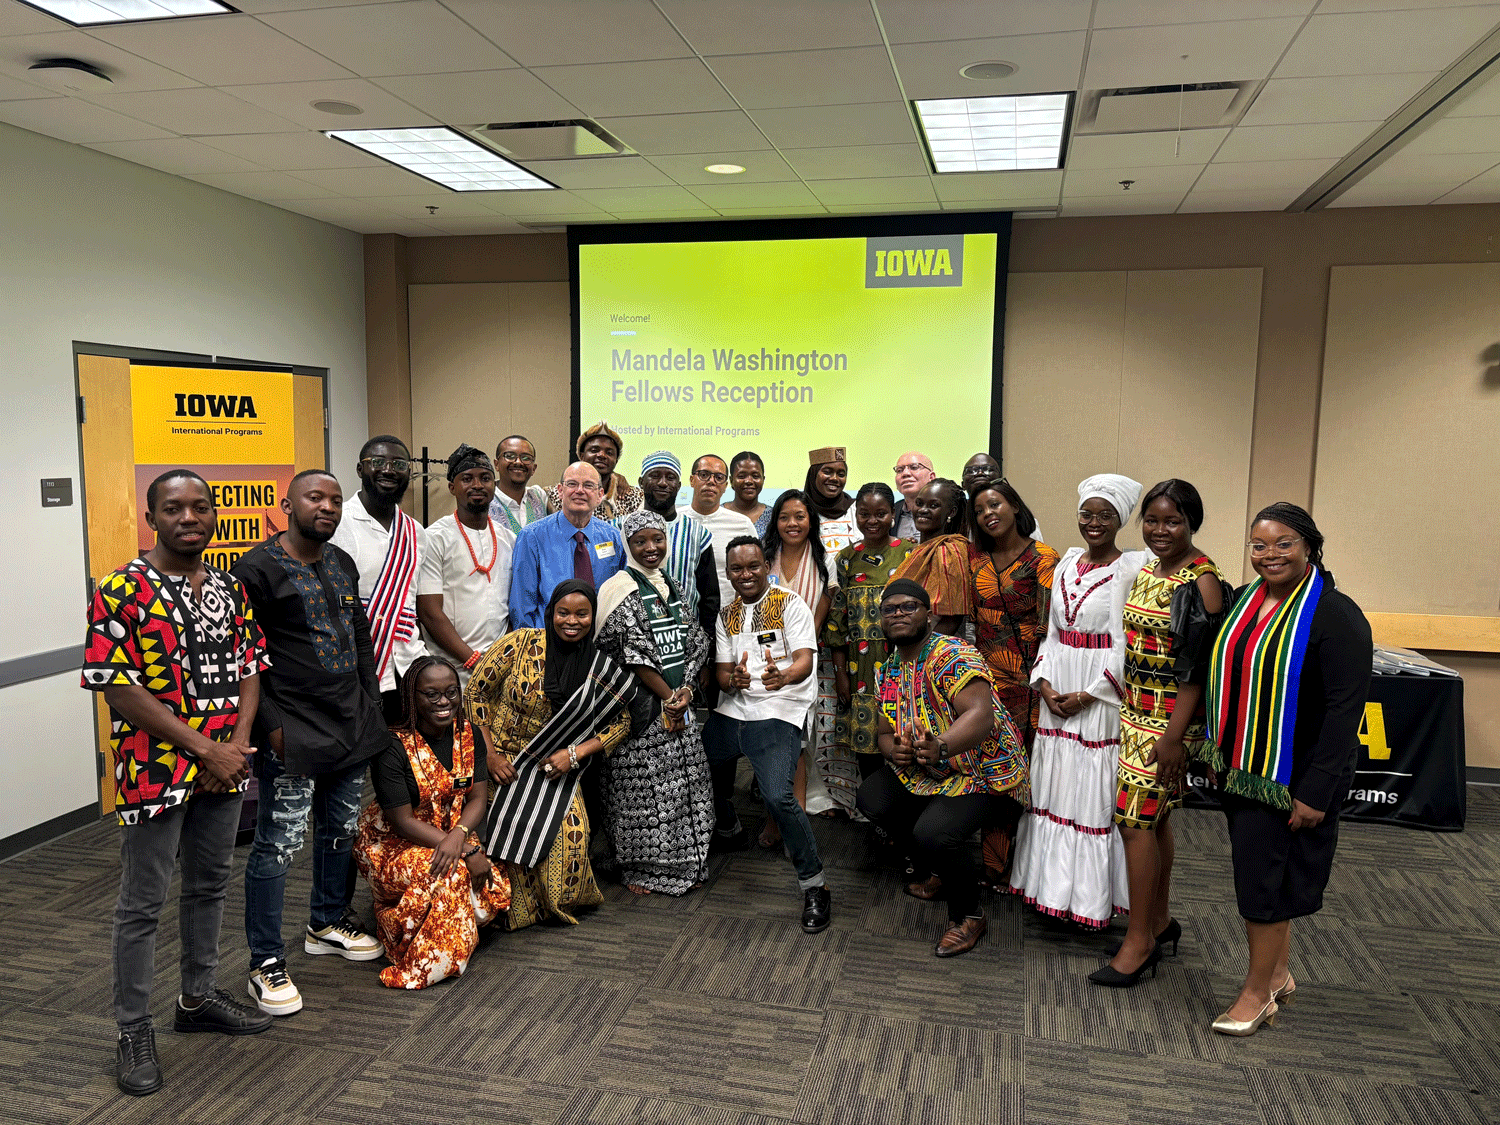 Mandela Fellows dressed in traditional African dress with Russ Ganim in front of slide that says Mandela Washington Fellows Reception